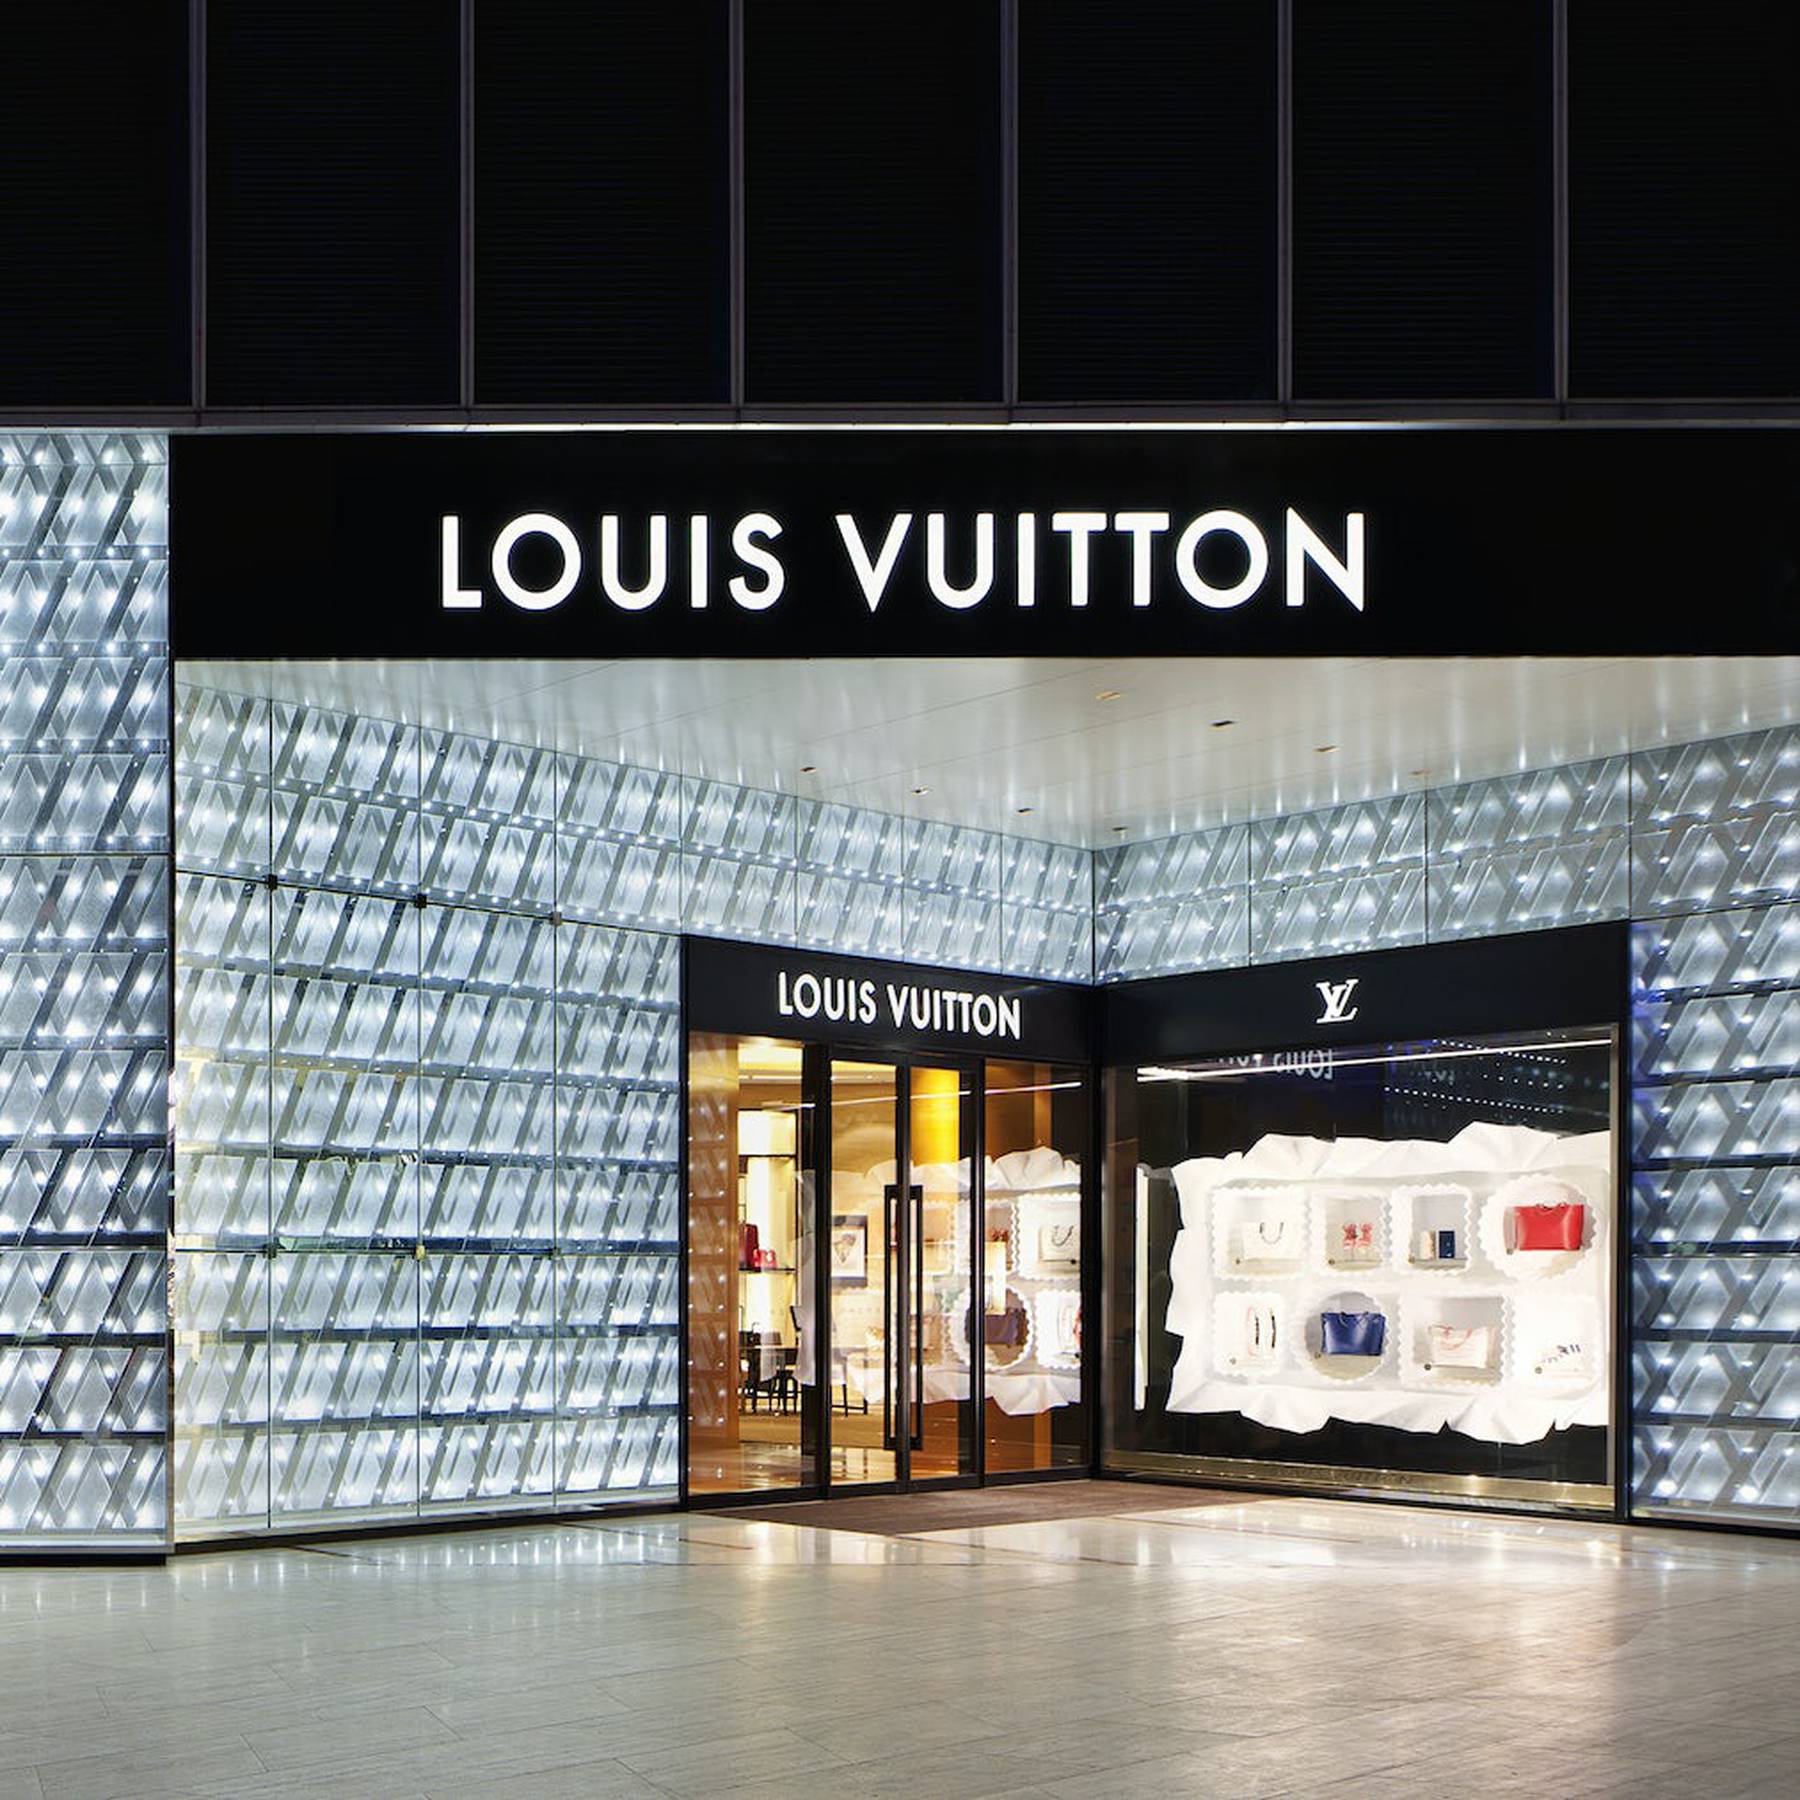 Top Louis Vuitton Executive Gets Key Role Helping Shape Brand